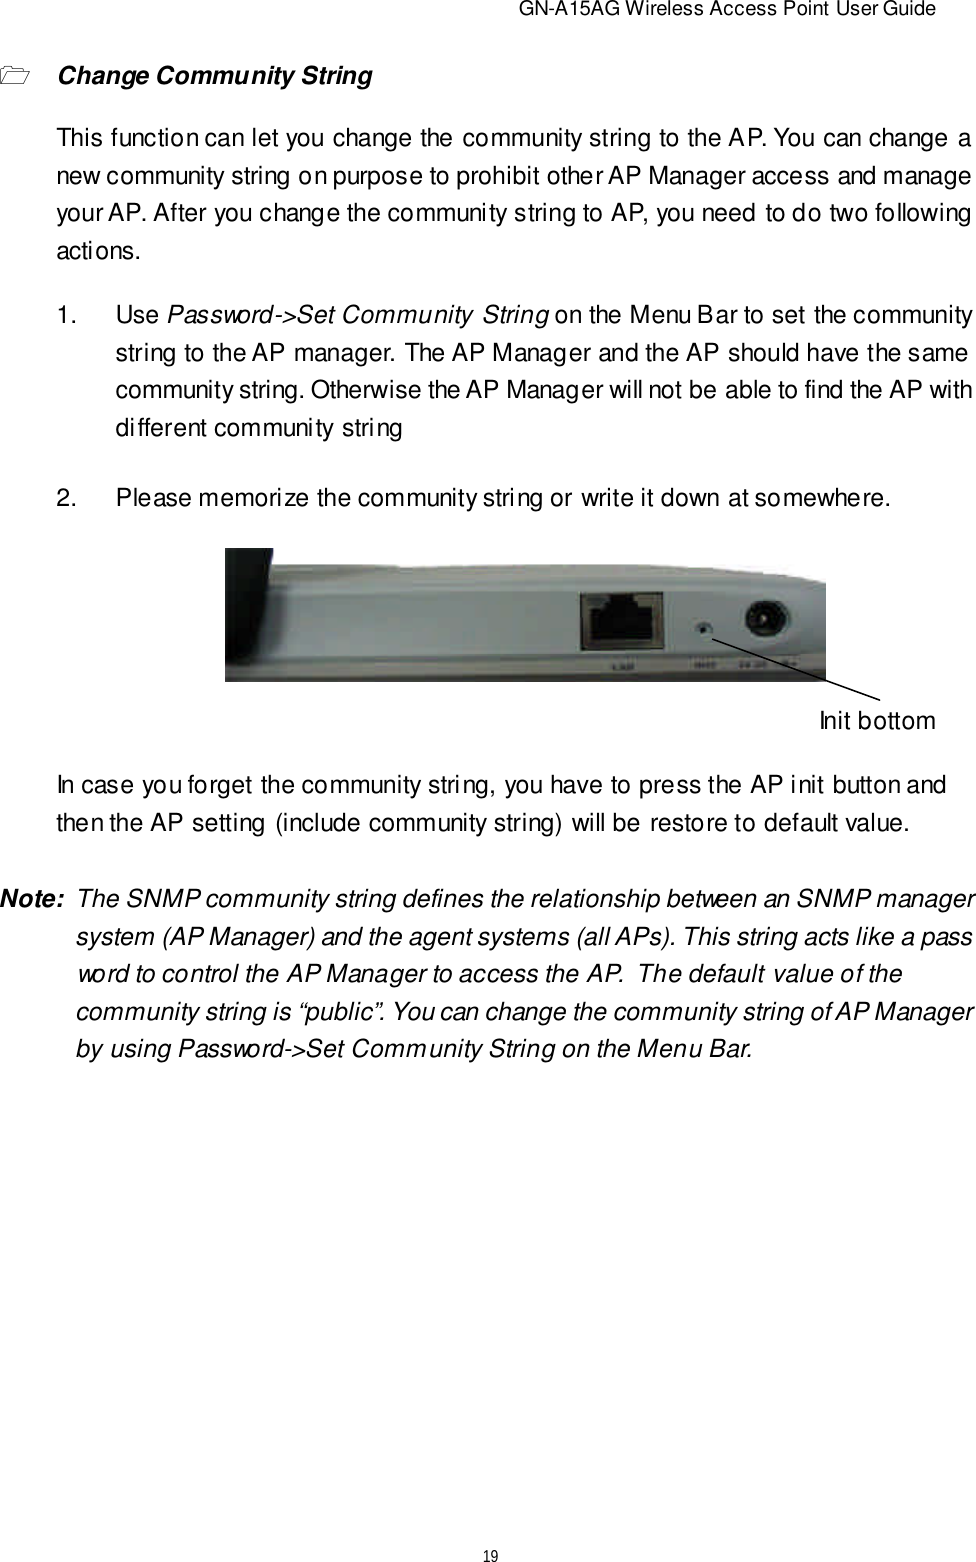                          GN-A15AG Wireless Access Point User Guide192.Please memorize the community string or write it down at somewhere.In case you forget the community string, you have to press the AP init button andthen the AP setting (include community string) will be restore to default value.Init bottomNote:  The SNMP community string defines the relationship between an SNMP manager   system (AP Manager) and the agent systems (all APs). This string acts like a pass   word to control the AP Manager to access the AP.  The default value of the   community string is “public”. You can change the community string of AP Manager   by using Password-&gt;Set Community String on the Menu Bar.1Change Community StringThis function can let you change the community string to the AP. You can change anew community string on purpose to prohibit other AP Manager access and manageyour AP. After you change the community string to AP, you need to do two followingactions.1.Use Password-&gt;Set Community String on the Menu Bar to set the communitystring to the AP manager. The AP Manager and the AP should have the samecommunity string. Otherwise the AP Manager will not be able to find the AP withdifferent community string